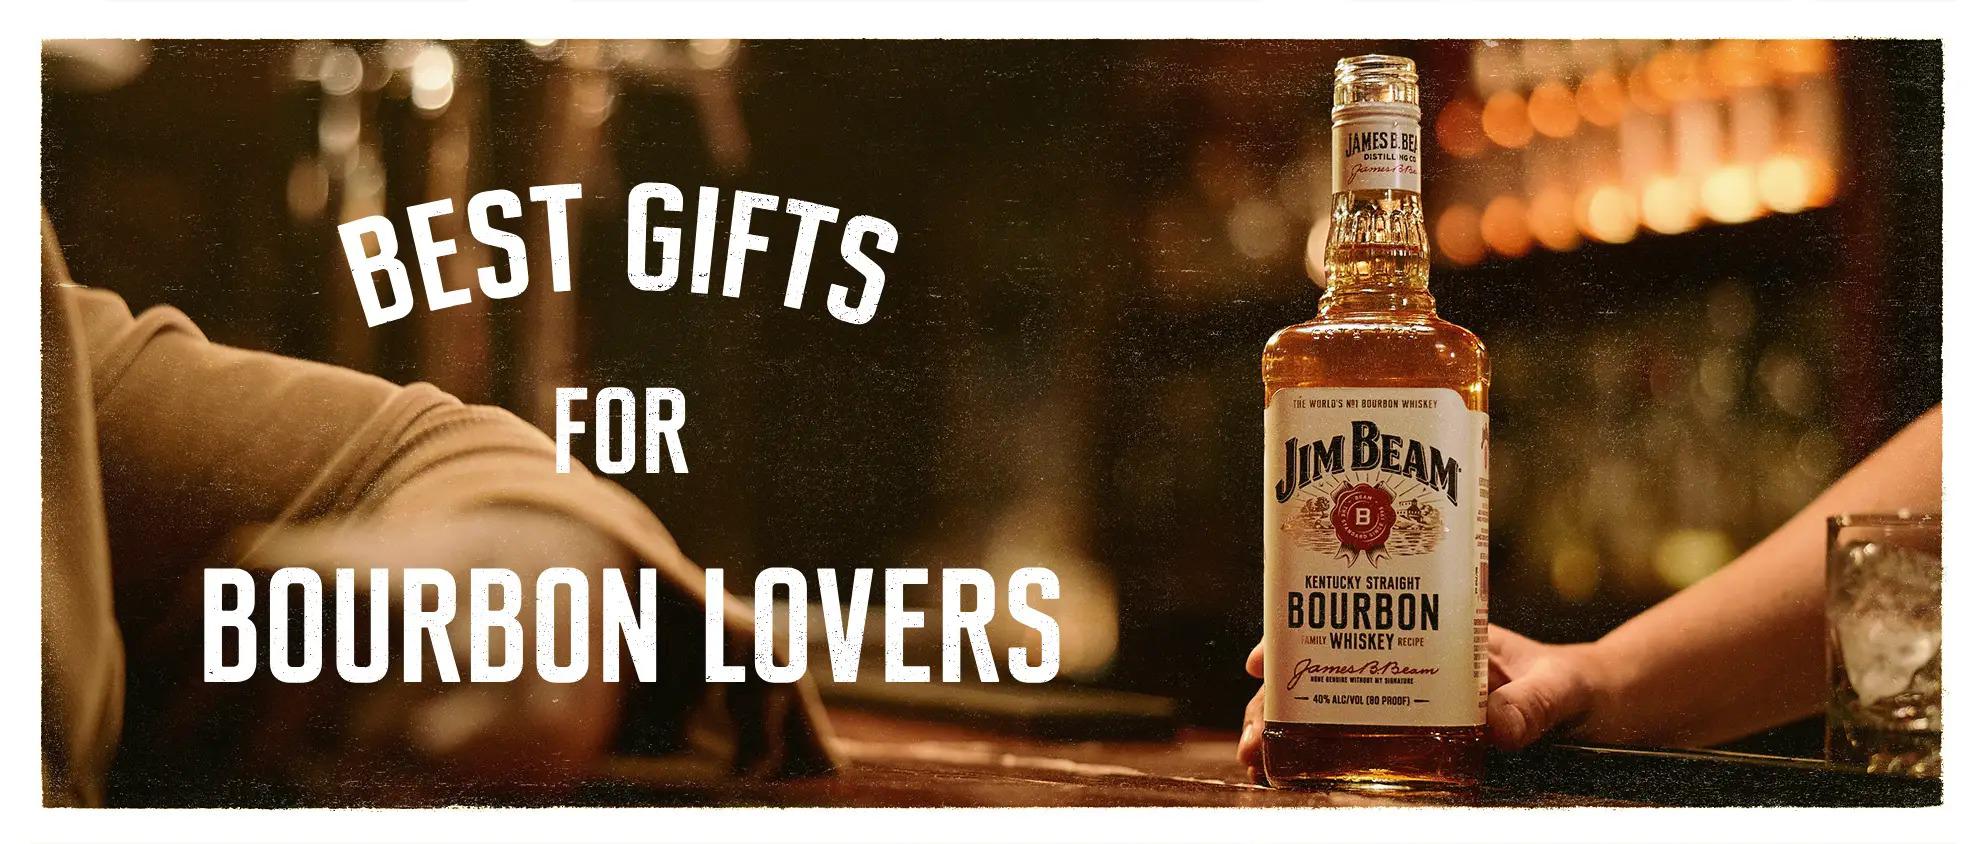 Top 5 Bourbons for Christmas Gifts | The Barrel Tap